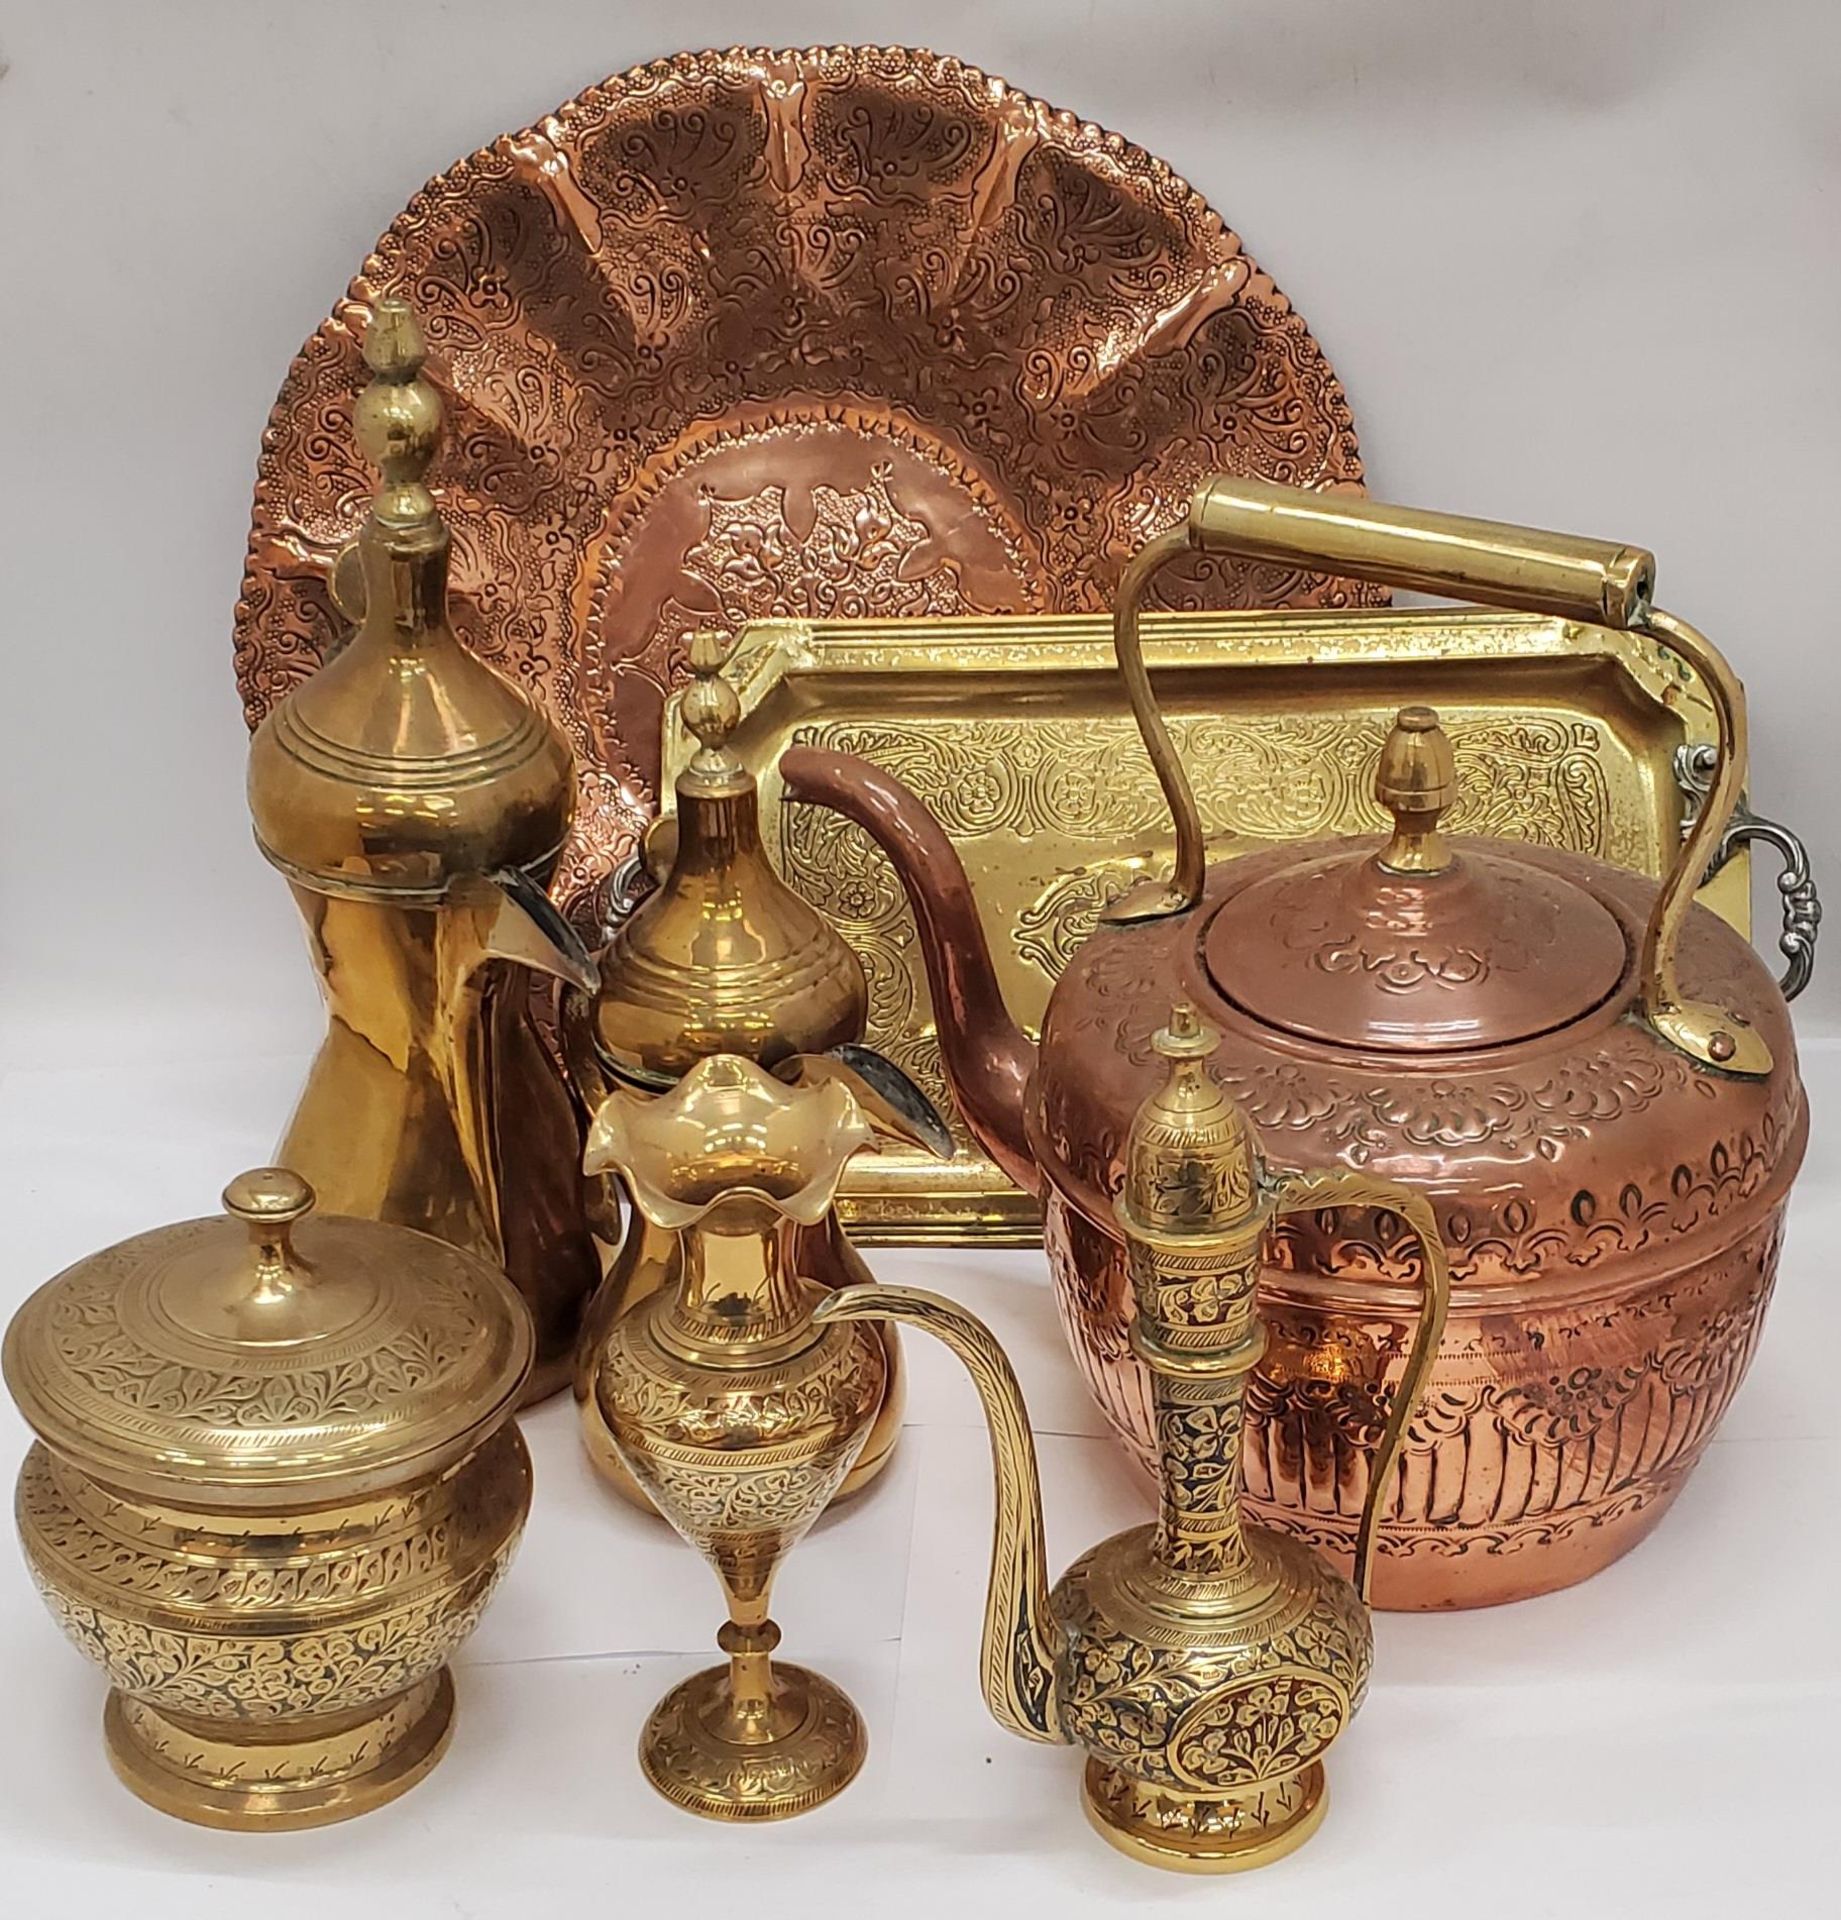 A QUANTITY OF BRASSWARE TO INCLUDE ASIAN STYLE COFFEE POTS, A LARGE COPPER AND BRASS KETTLE,